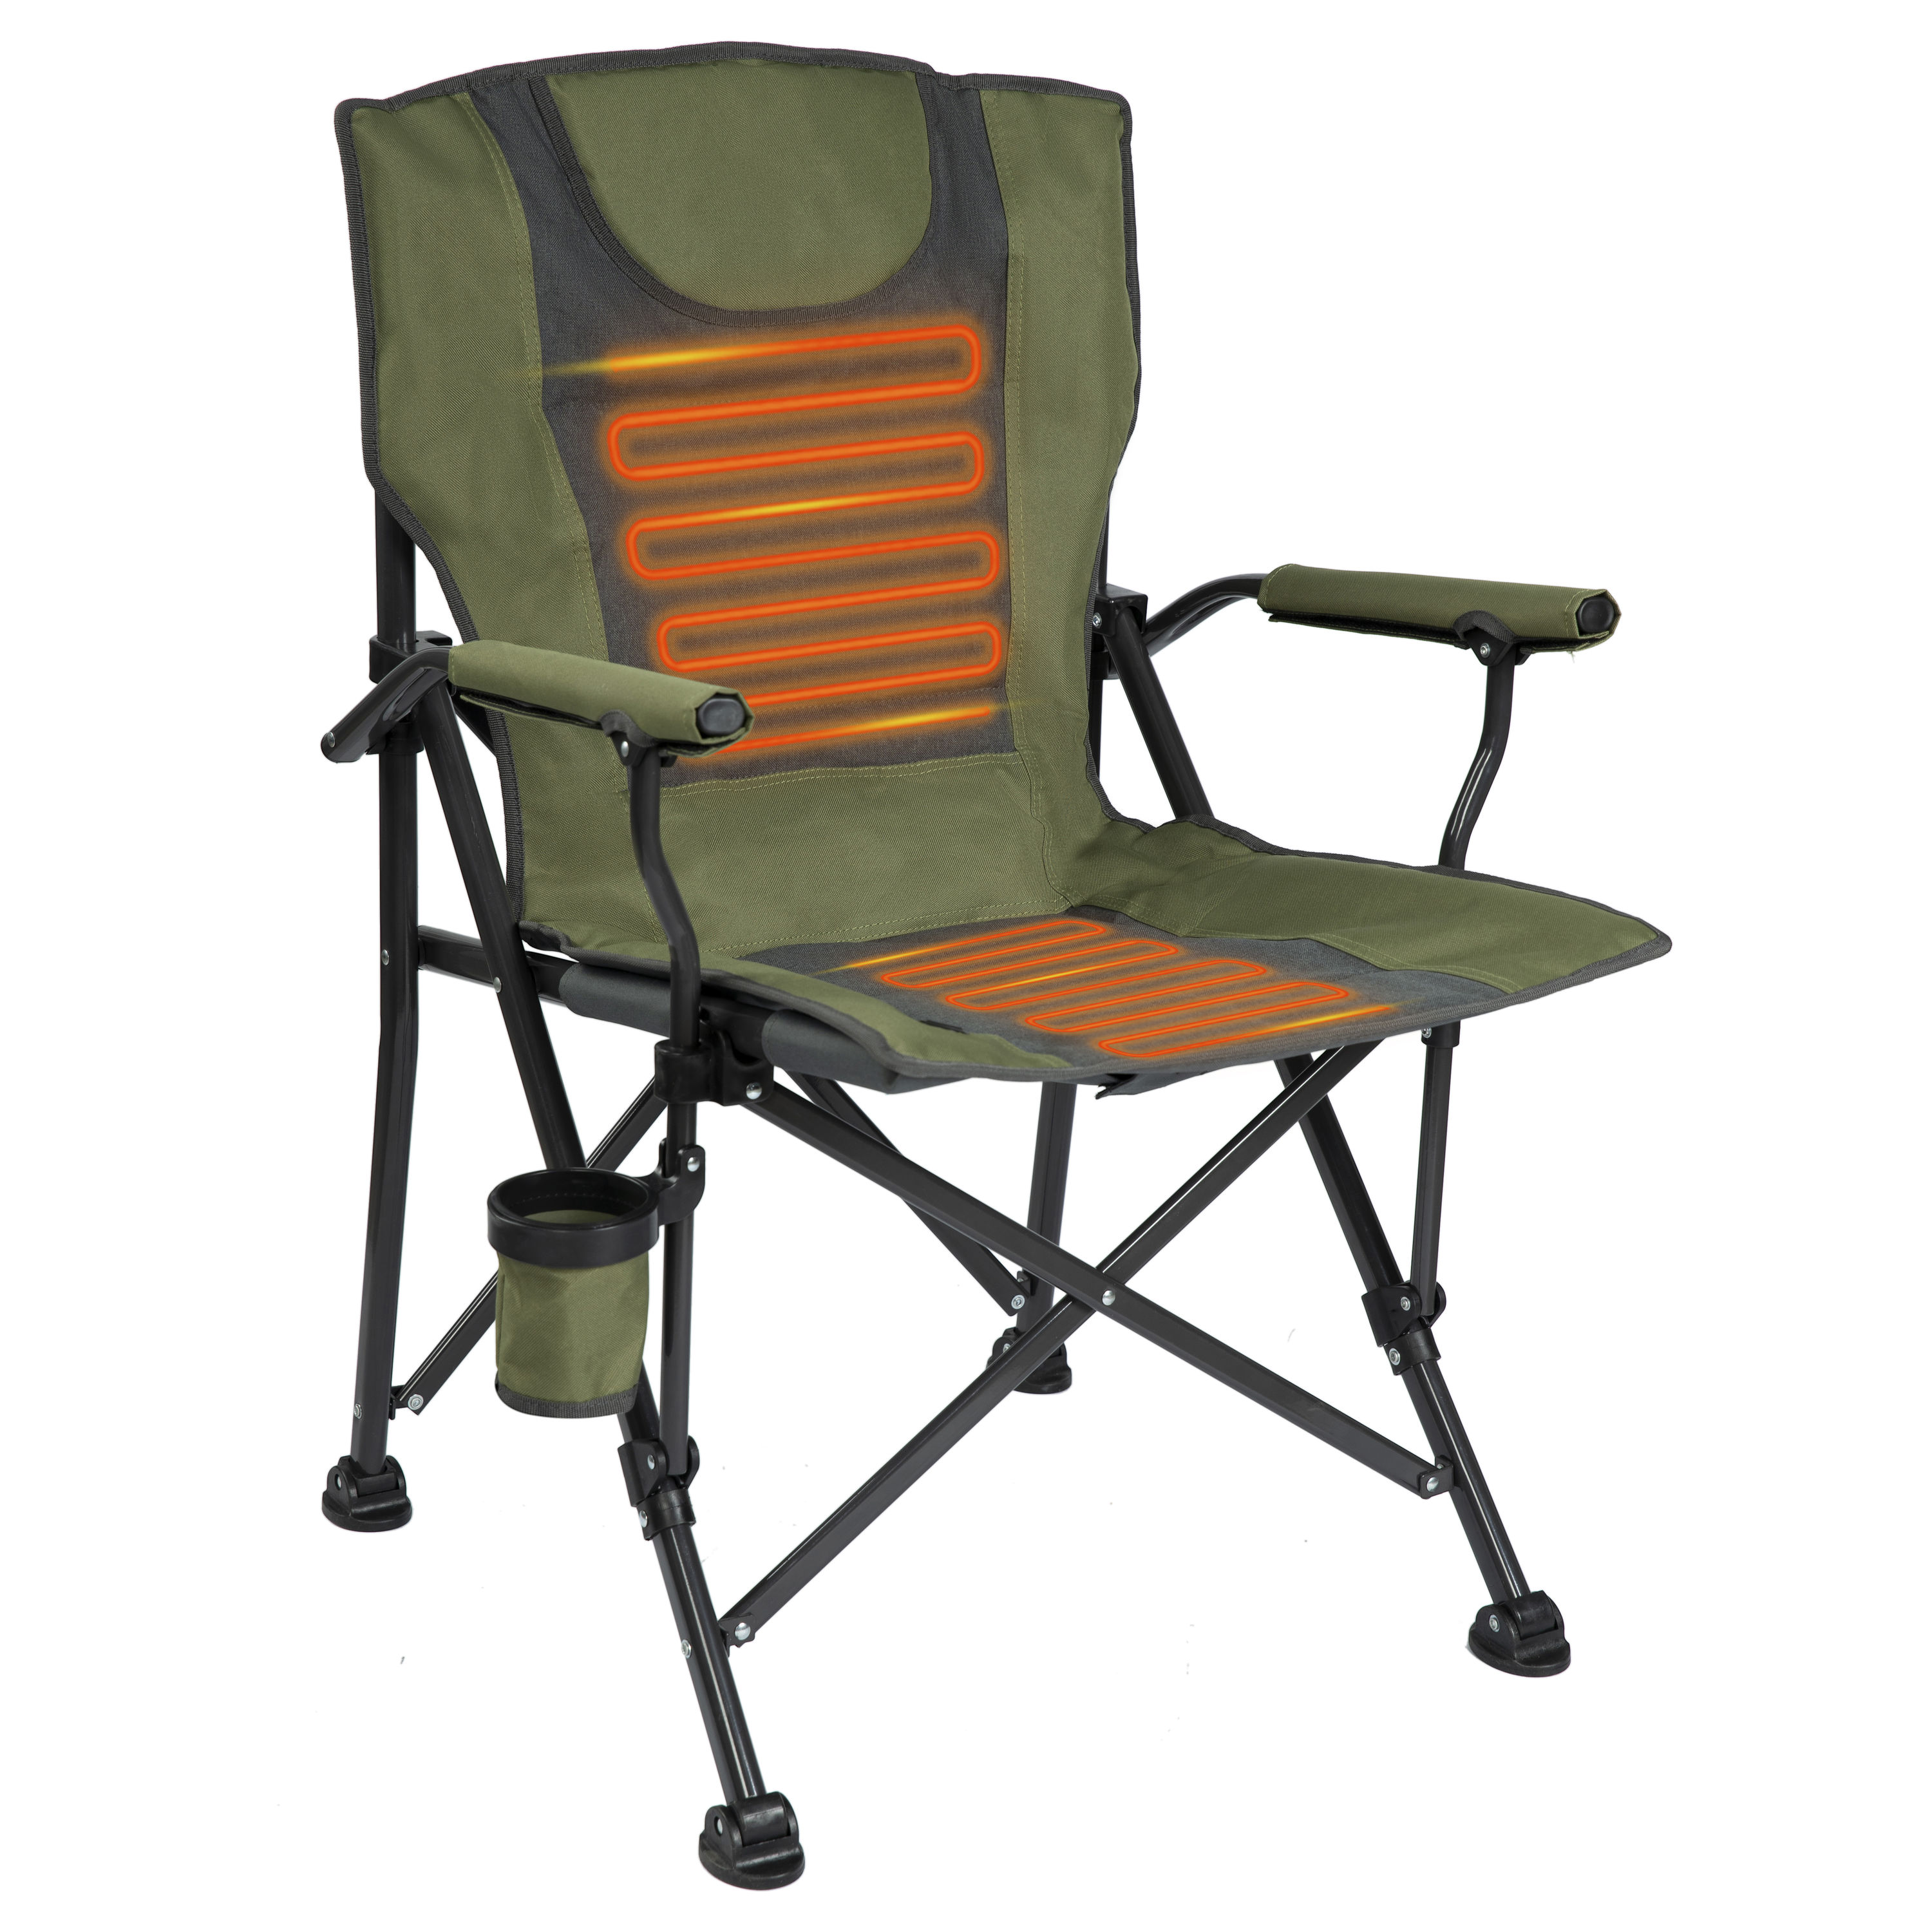 Backyard Expressions Luxury Heated Portable Camp Chair Red/Grey Great for Camping, Sports and The Beach